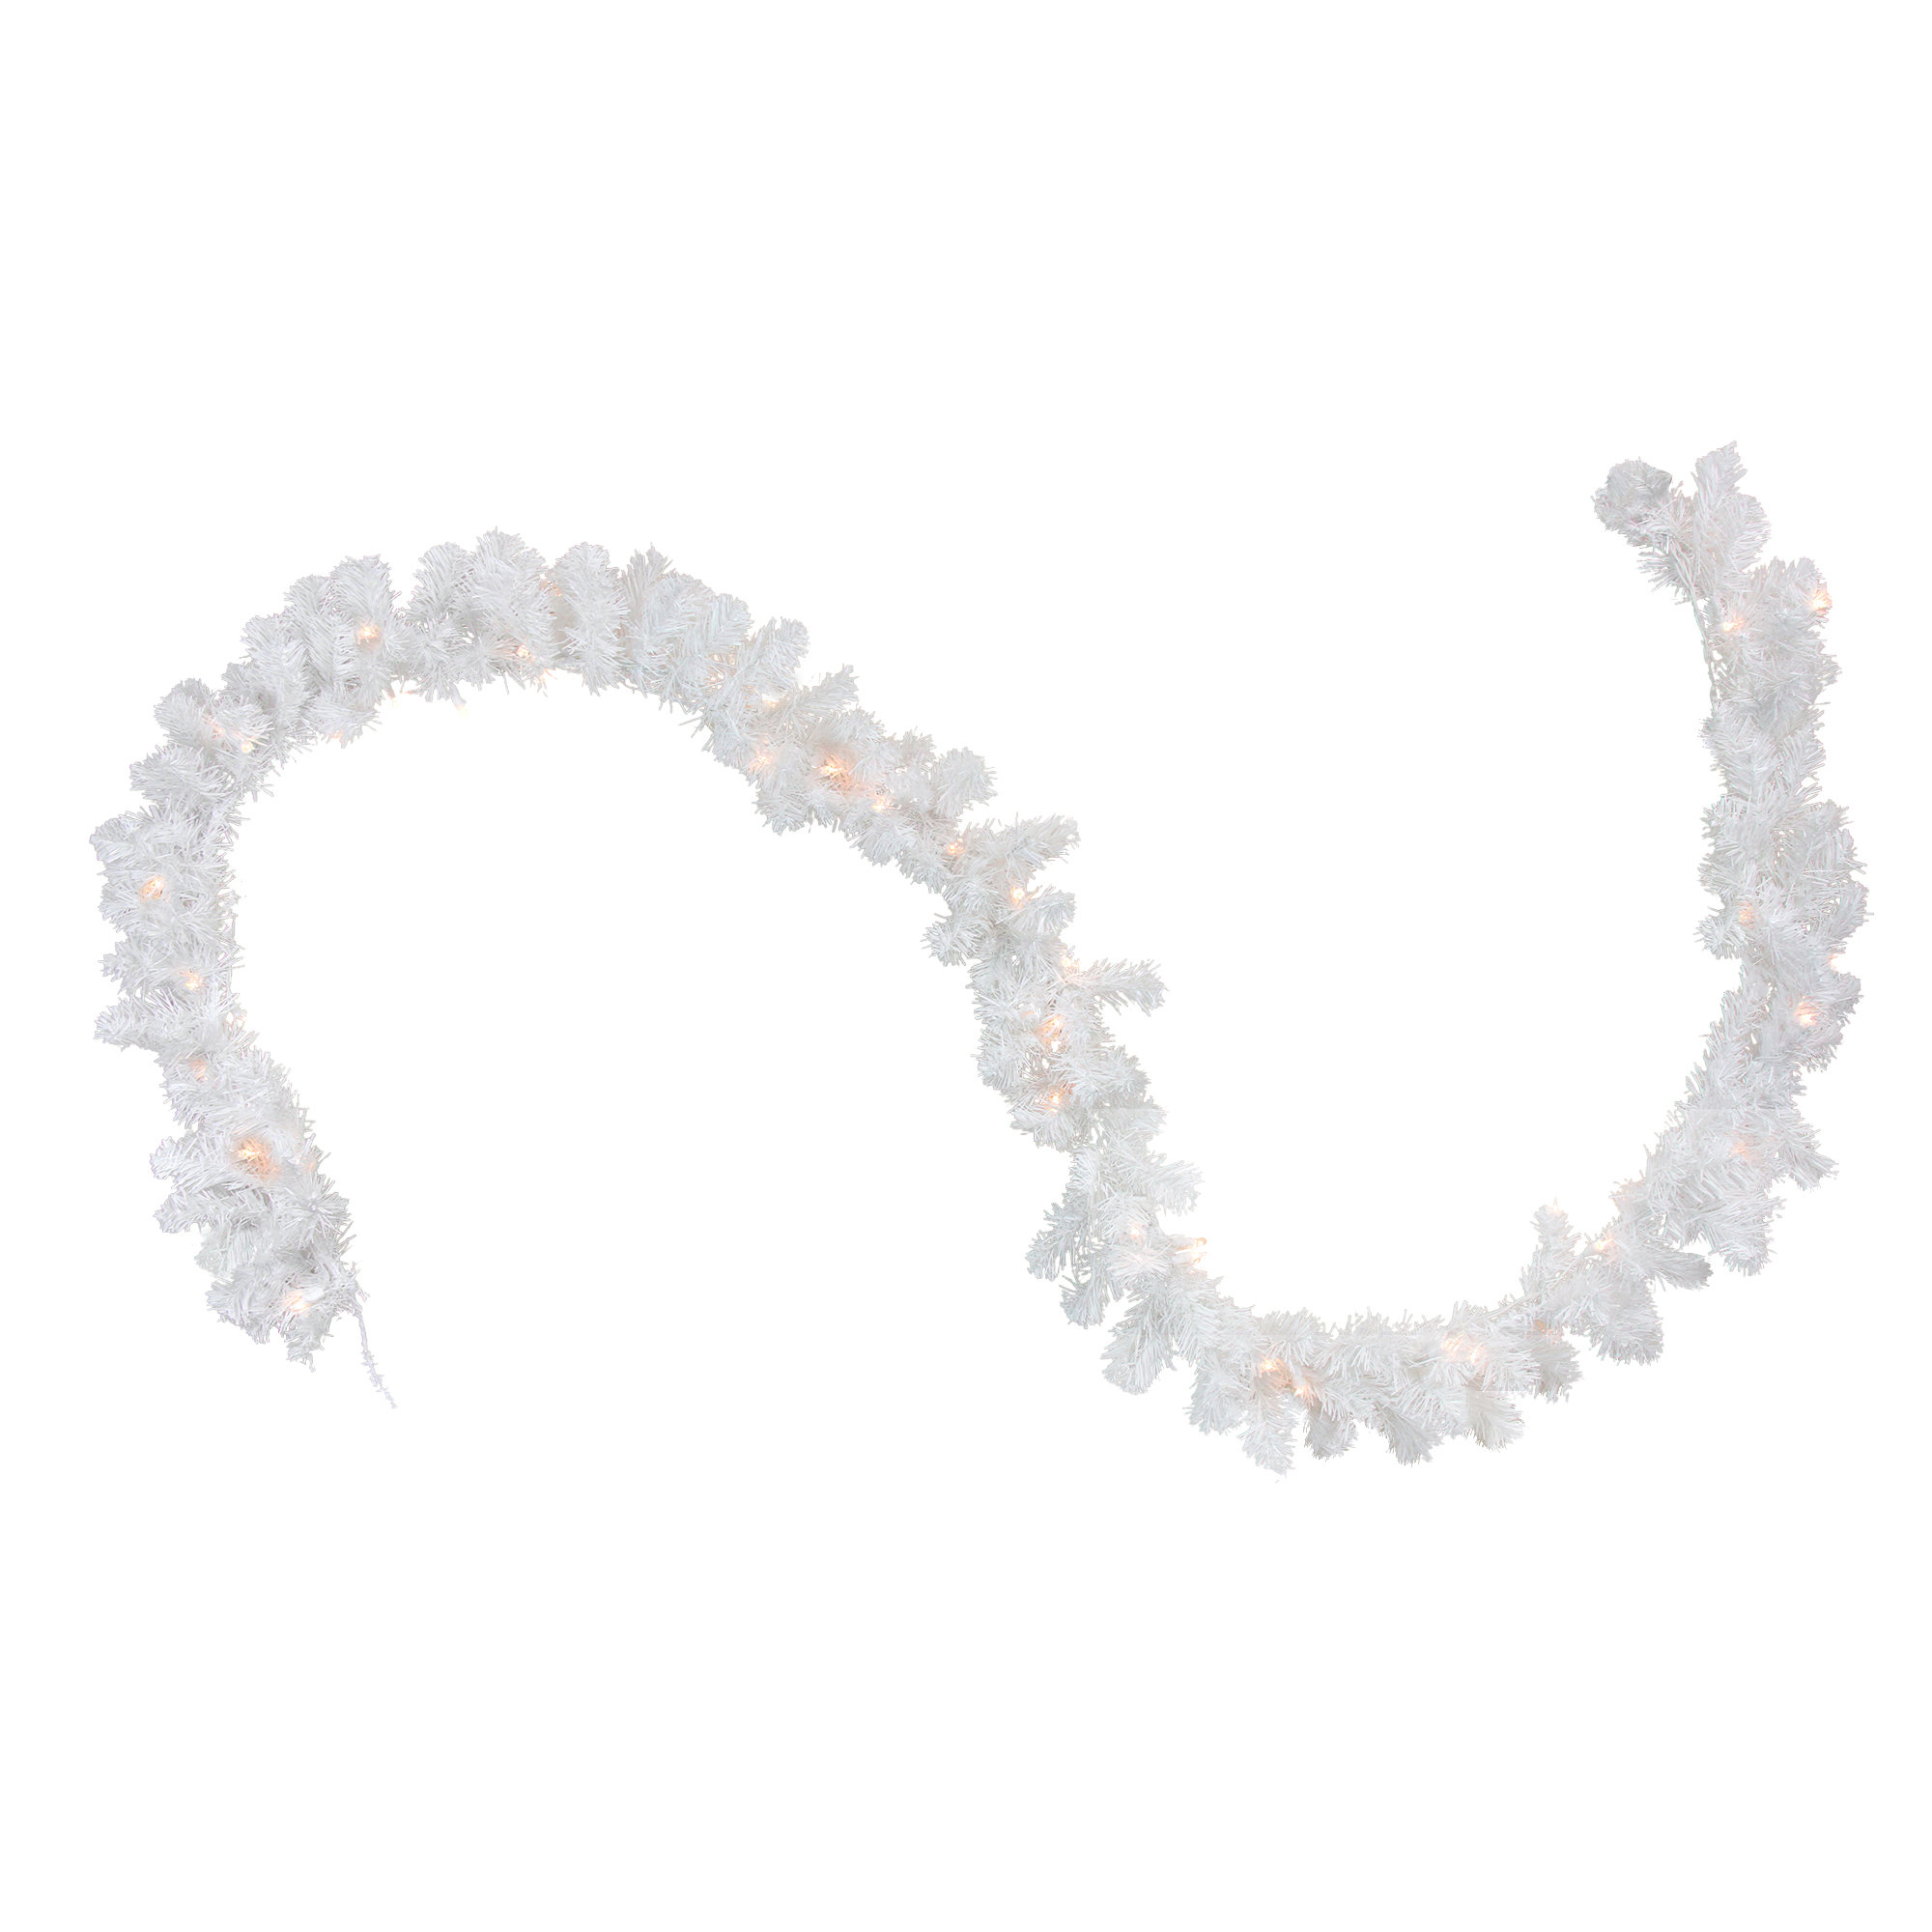 9' x 8 Pre-Lit Snow White Artificial Christmas Garland, Clear Lights